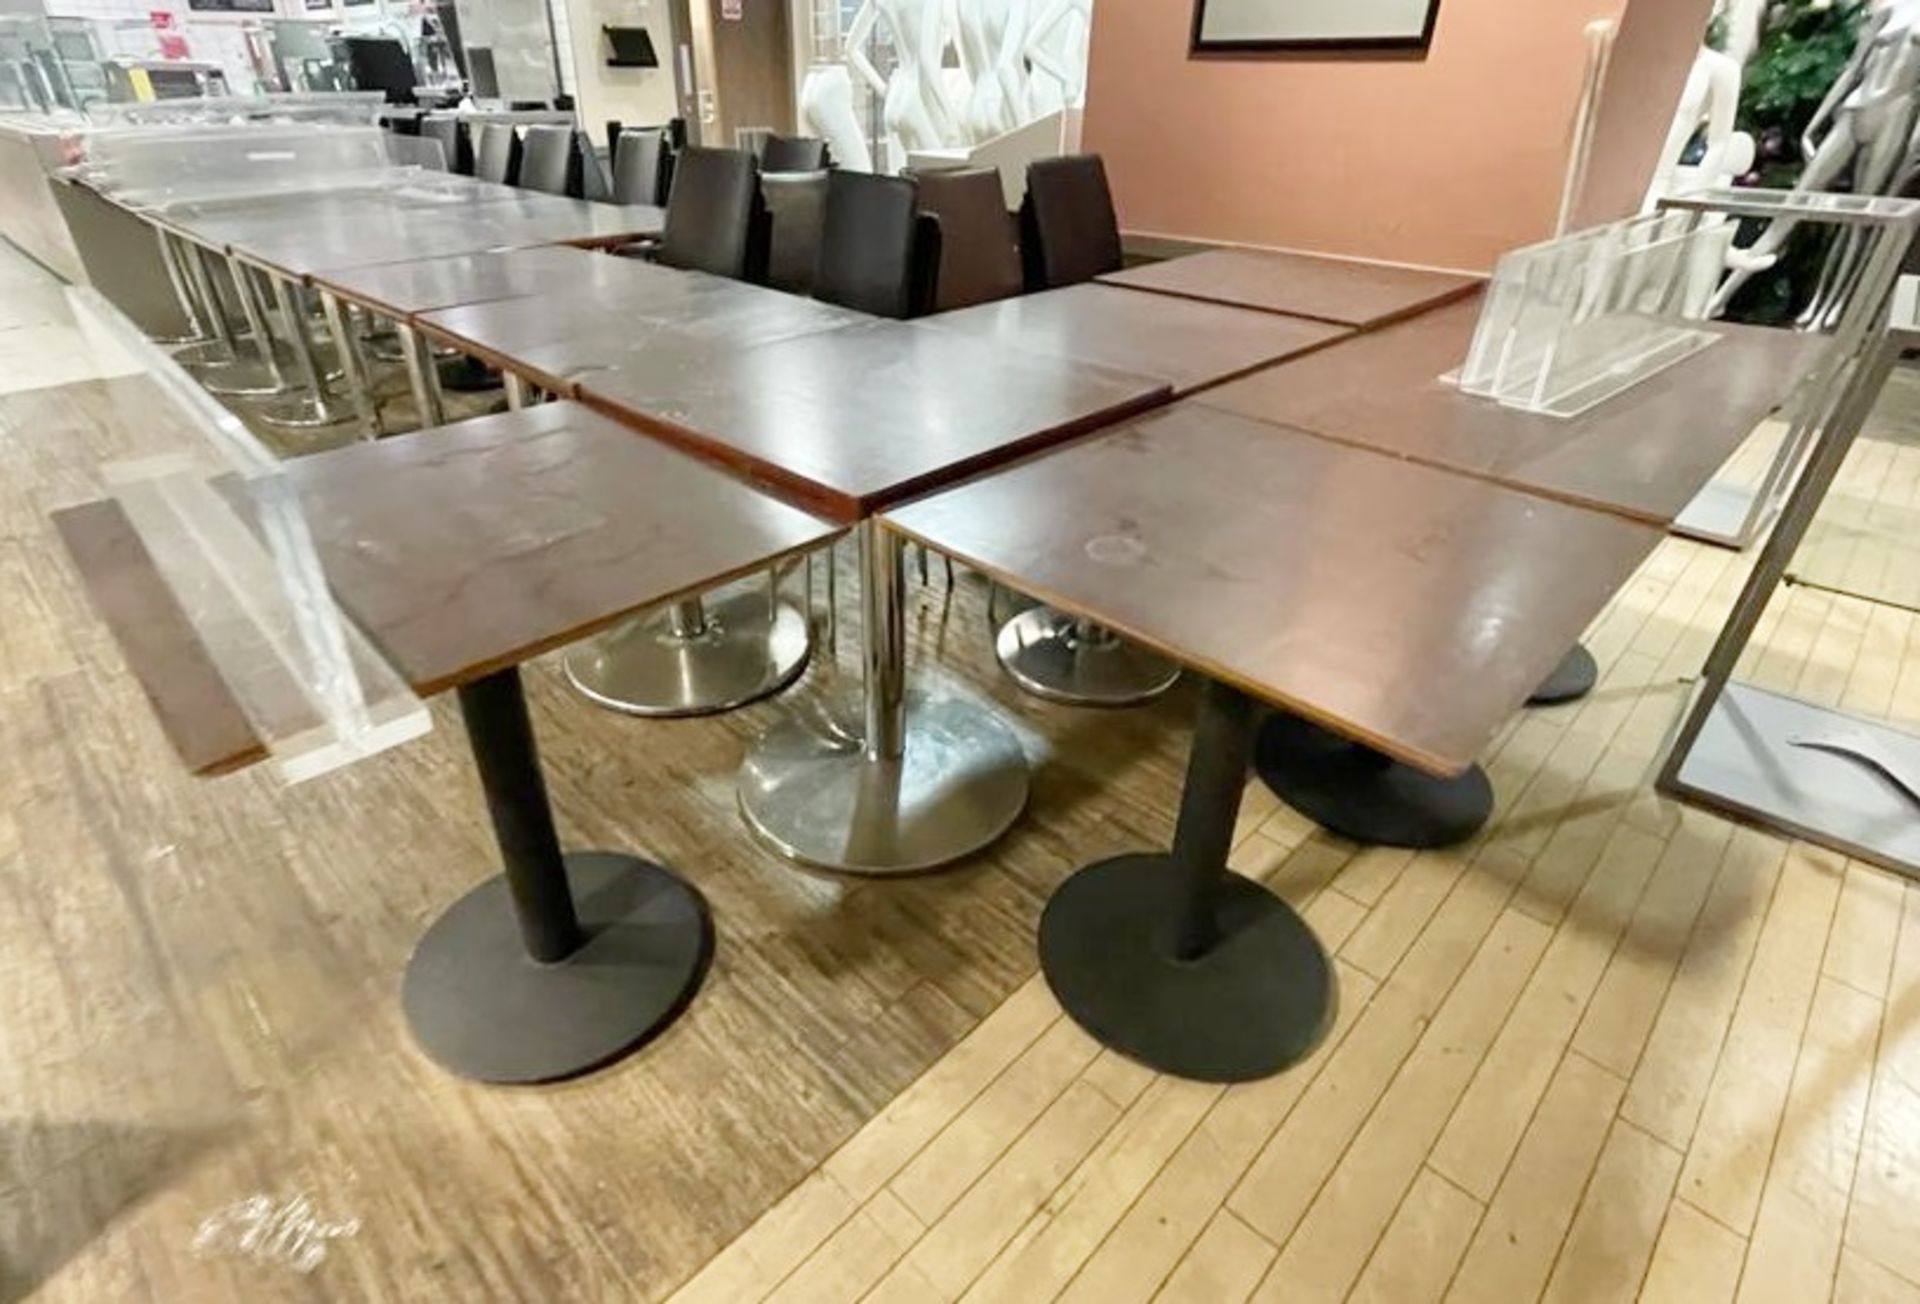 25 x Square Canteen Tables With Metal Pedestal Bases and Wooden Tops - CL670 - Ref: GEM189A -